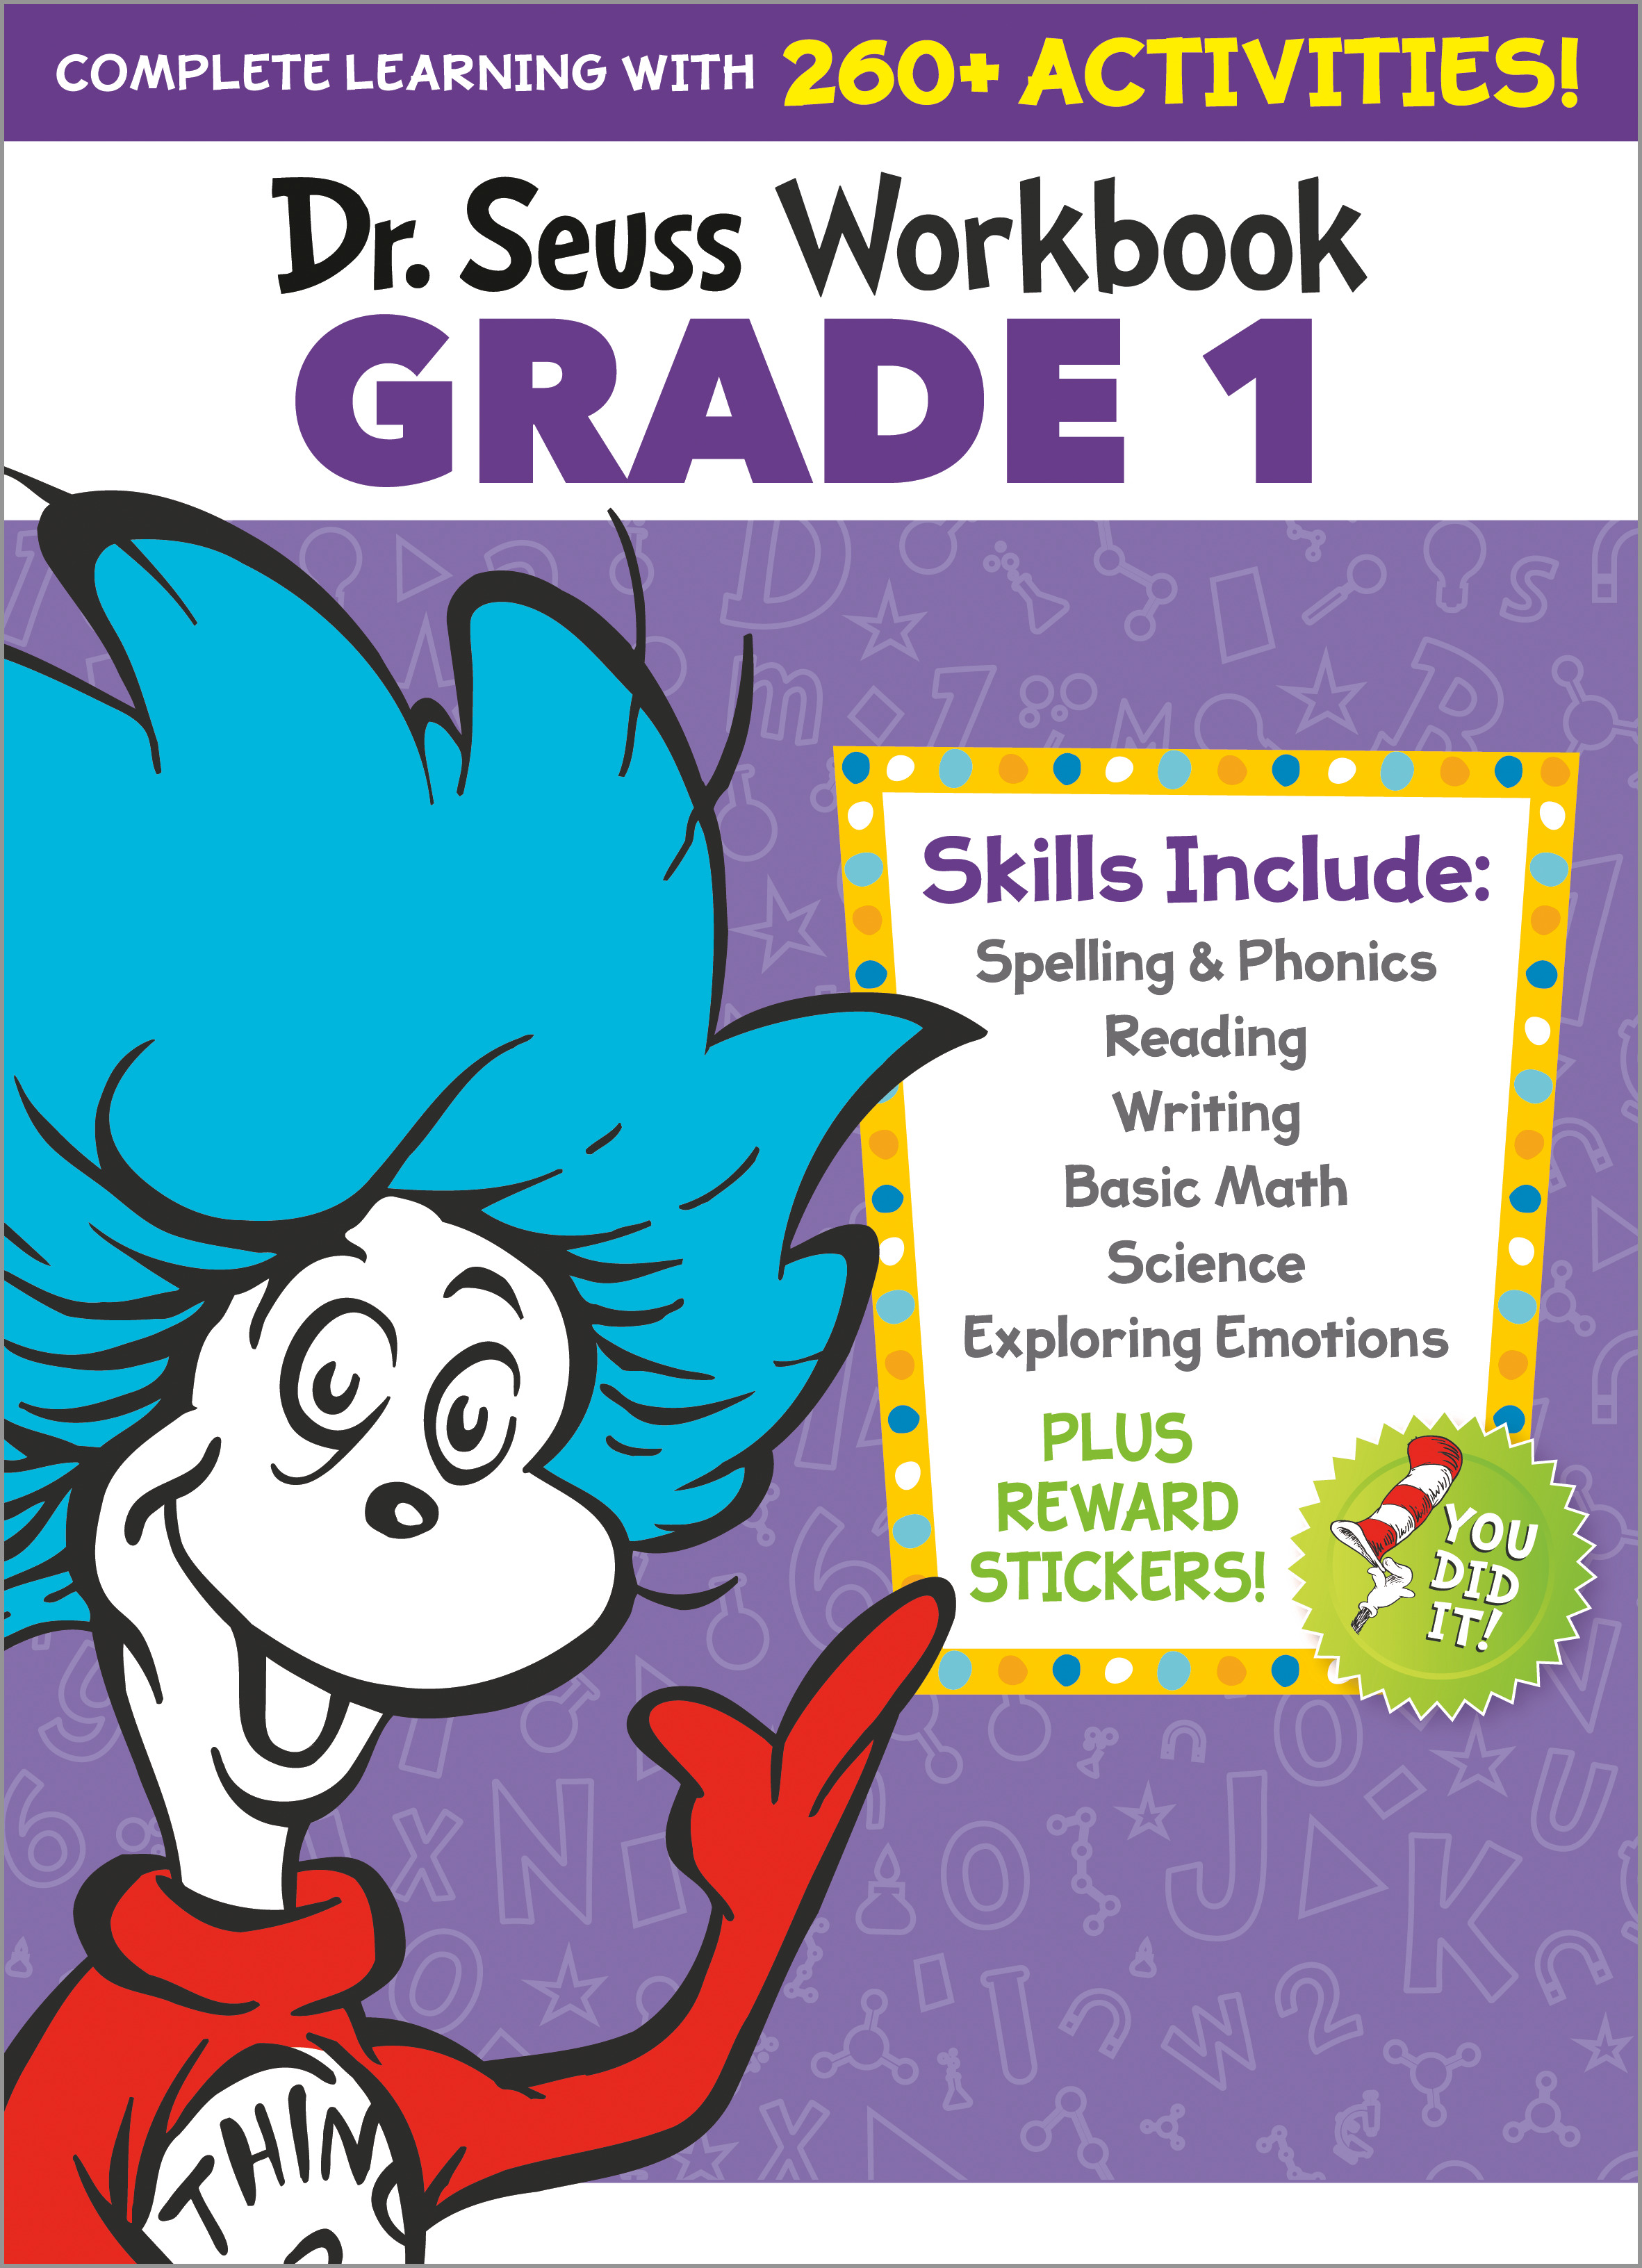 Dr. Seuss Workbook: Grade 1 : 260+ Fun Activities with Stickers and More! (Spelling, Phonics, Sight Words, Writing, Reading Comprehension, Math, Addition &amp; Subtraction, Science, SEL) | Dr. Seuss